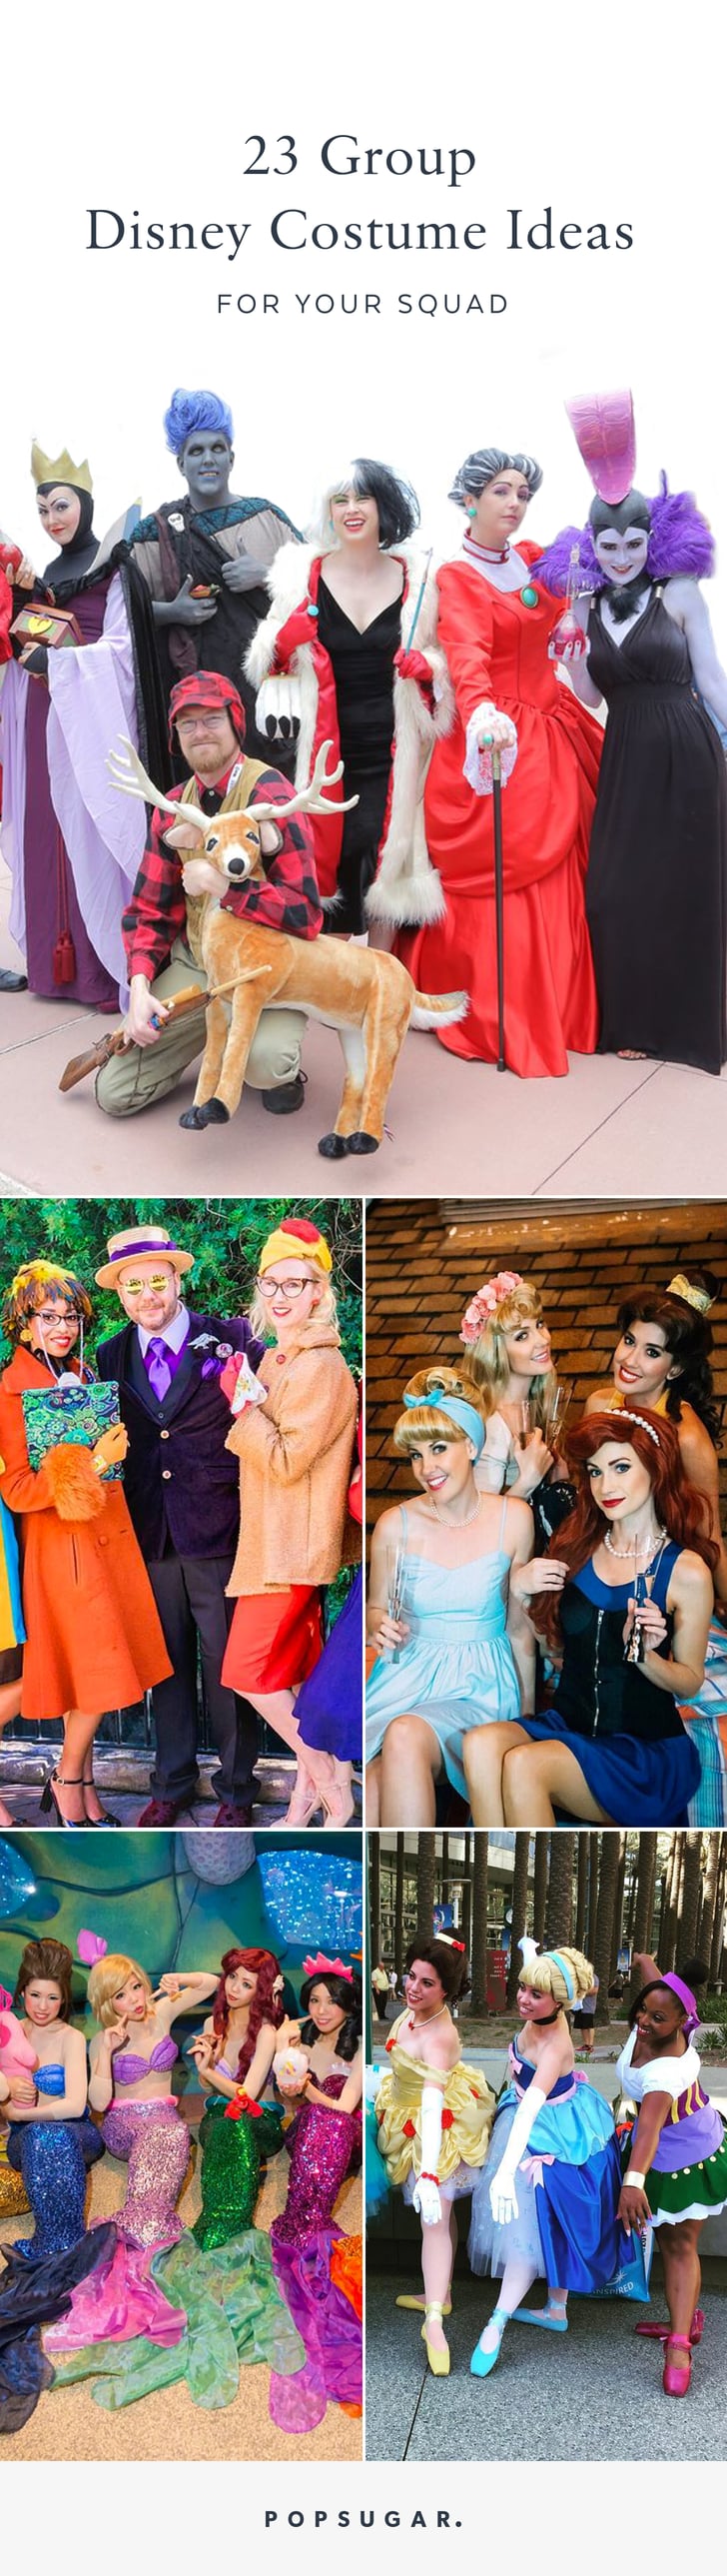 Pin It Disney Costume Ideas For Groups Popsugar Love And Sex Photo 24 6251